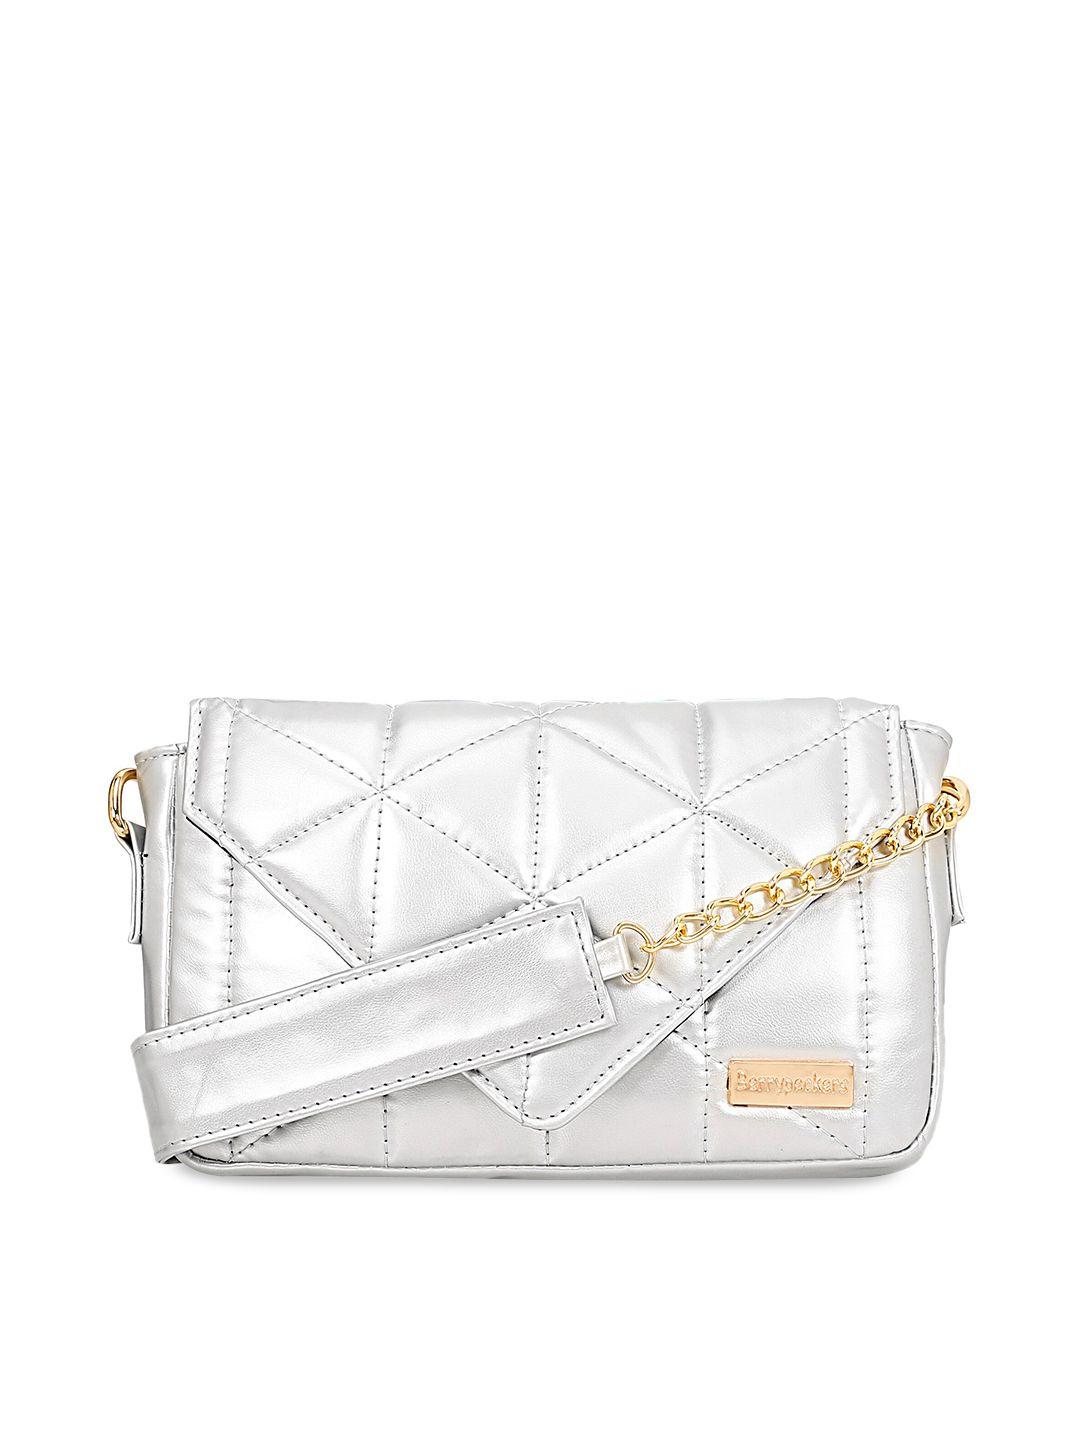 berrypeckers silver-toned embellished structured satchel with cut work